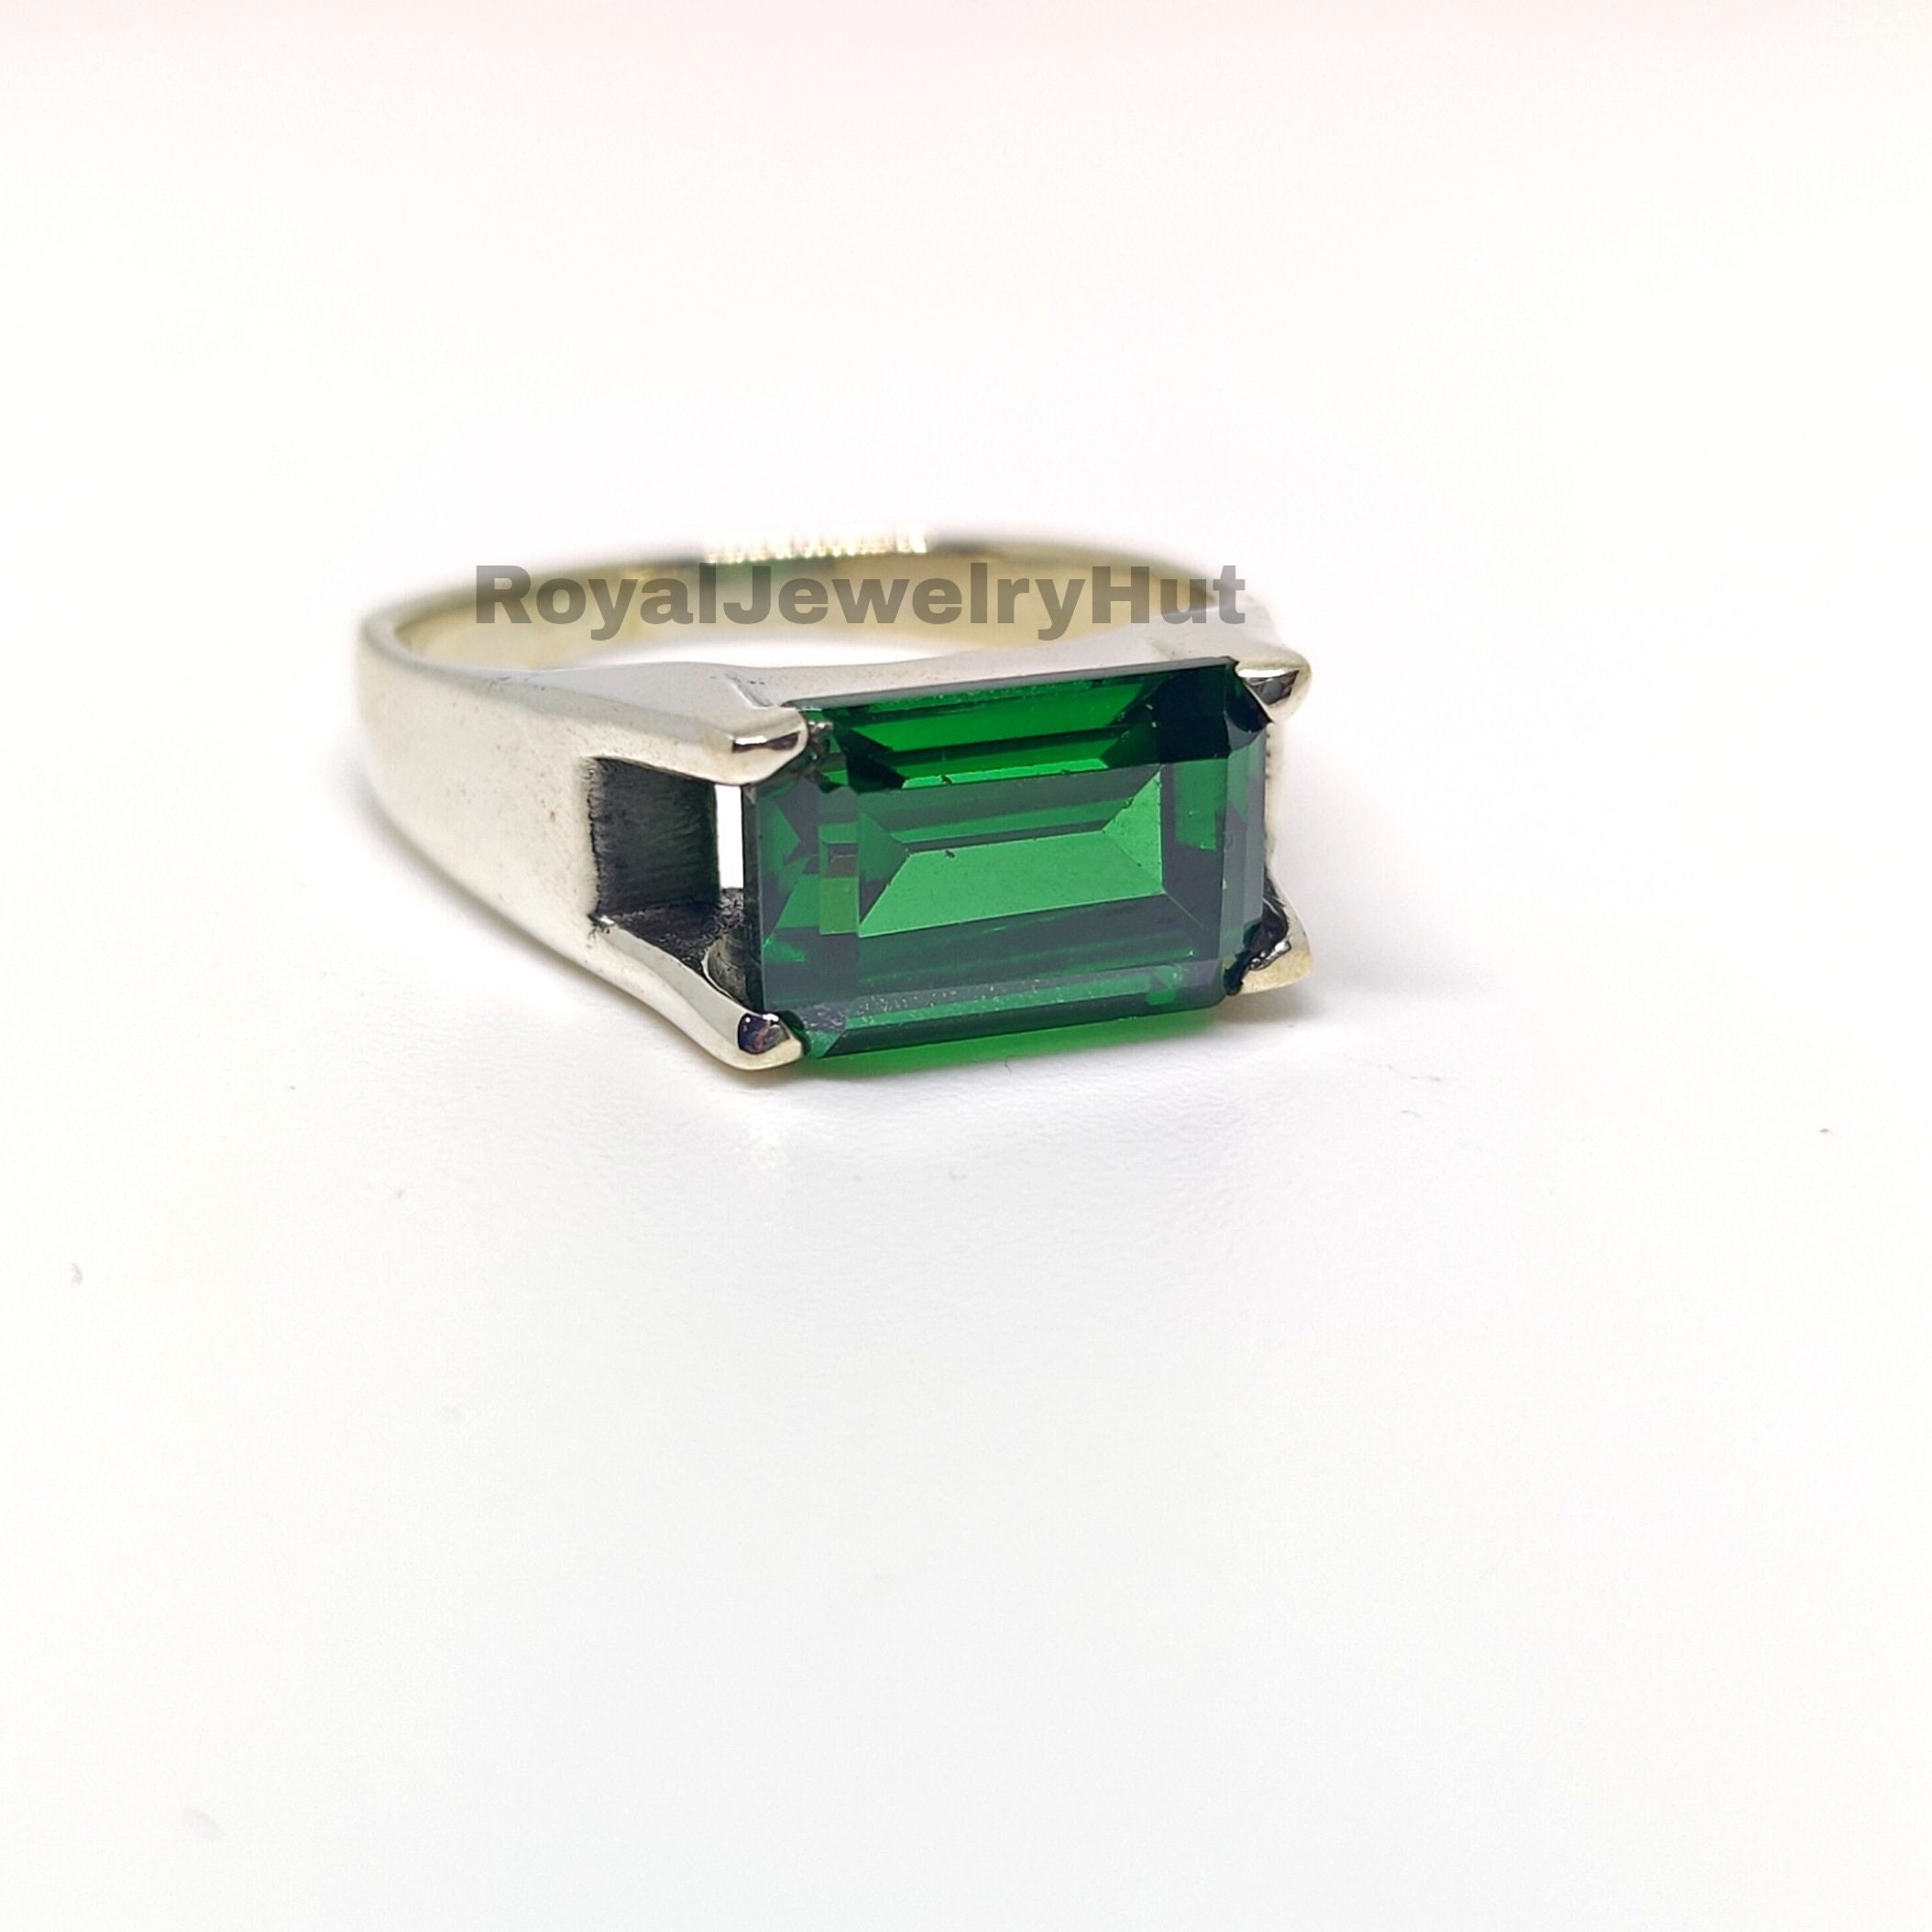 Male Emerald rings also available... - Anton's Gold Rush | Facebook